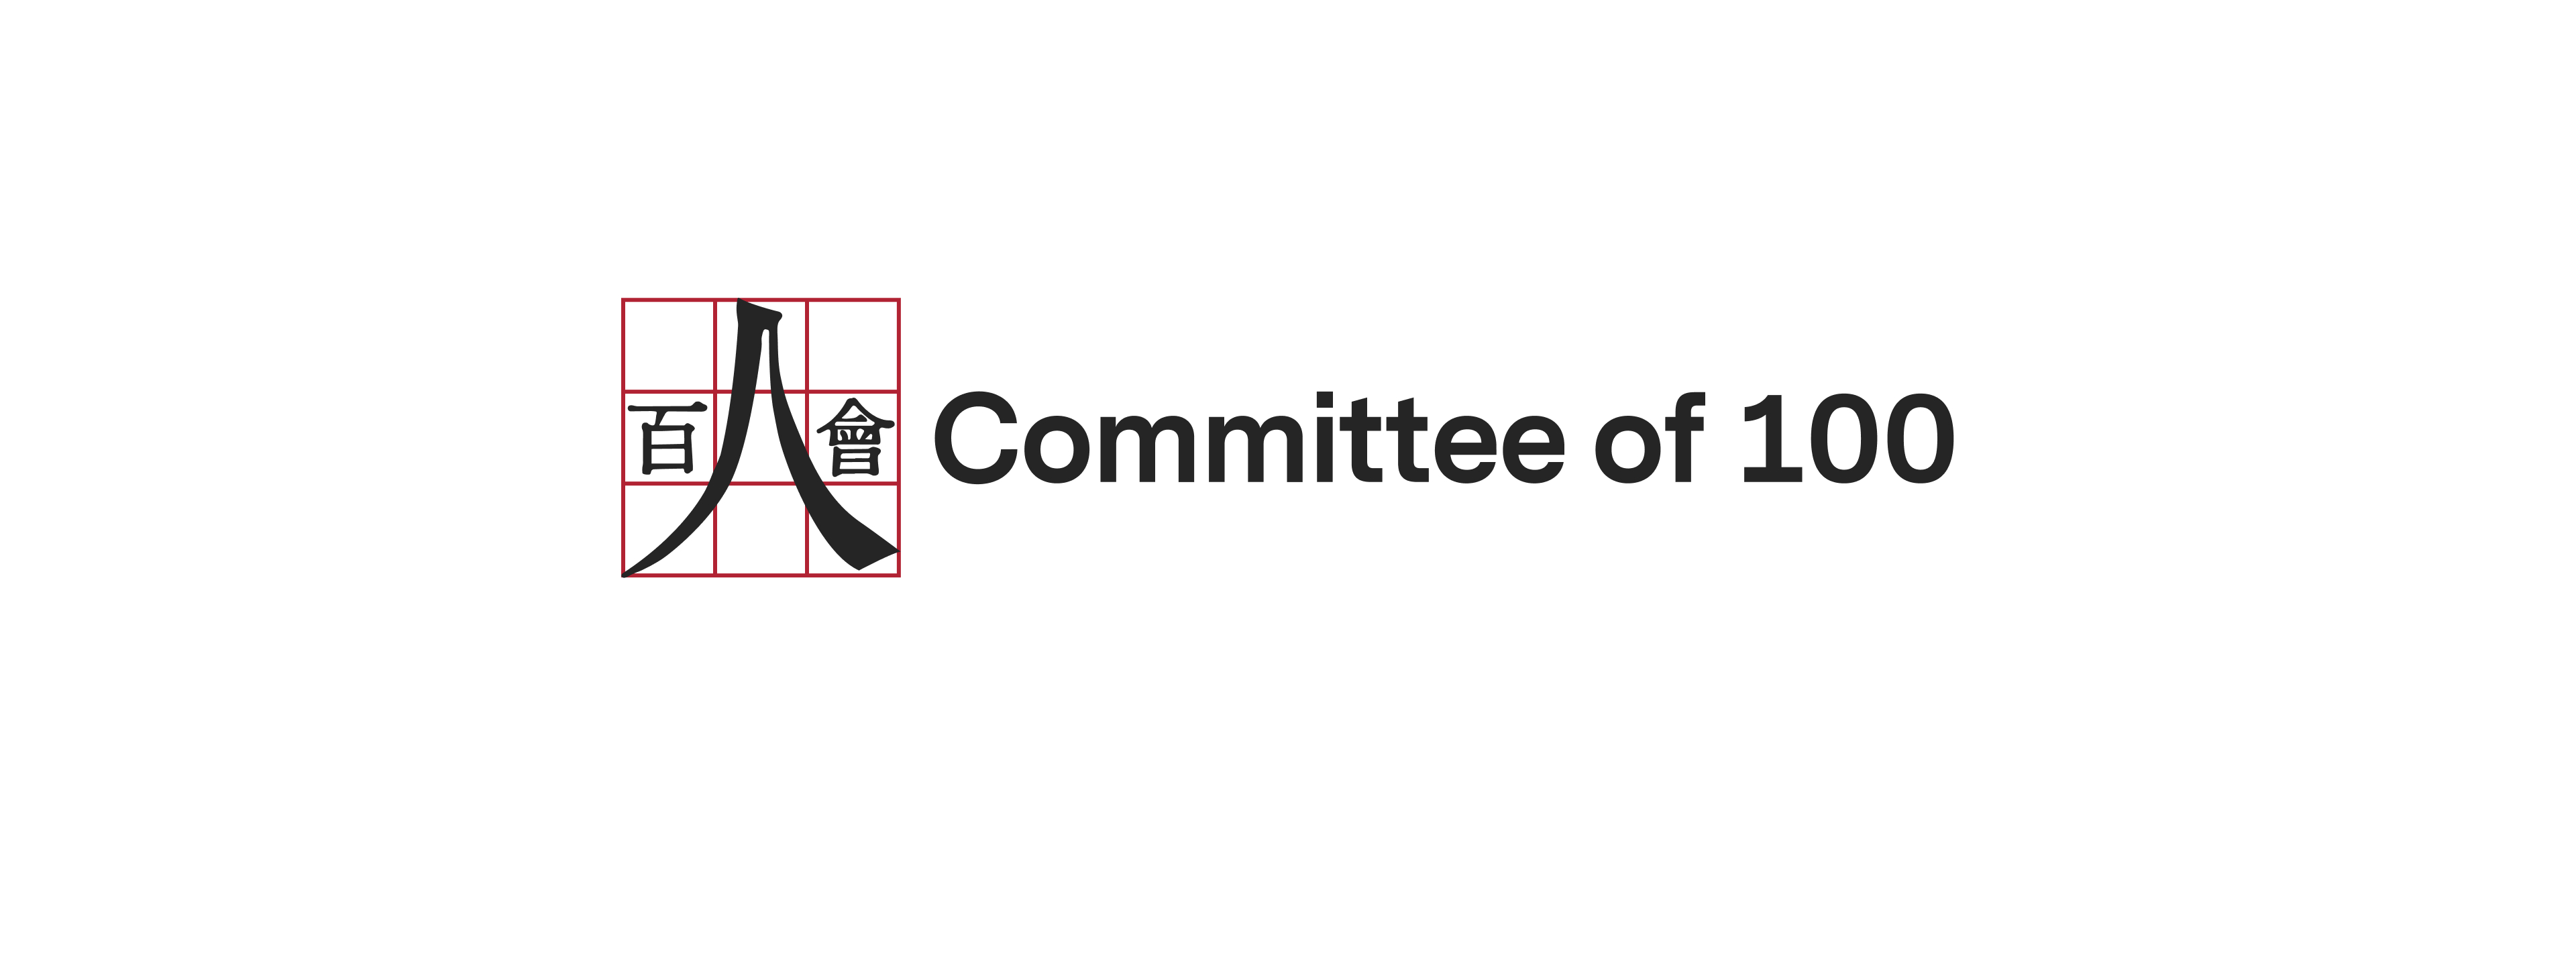 Committee of 100 Welcomes Three New Members: Anne H. Chow, Paul Lin, and Jay Xu